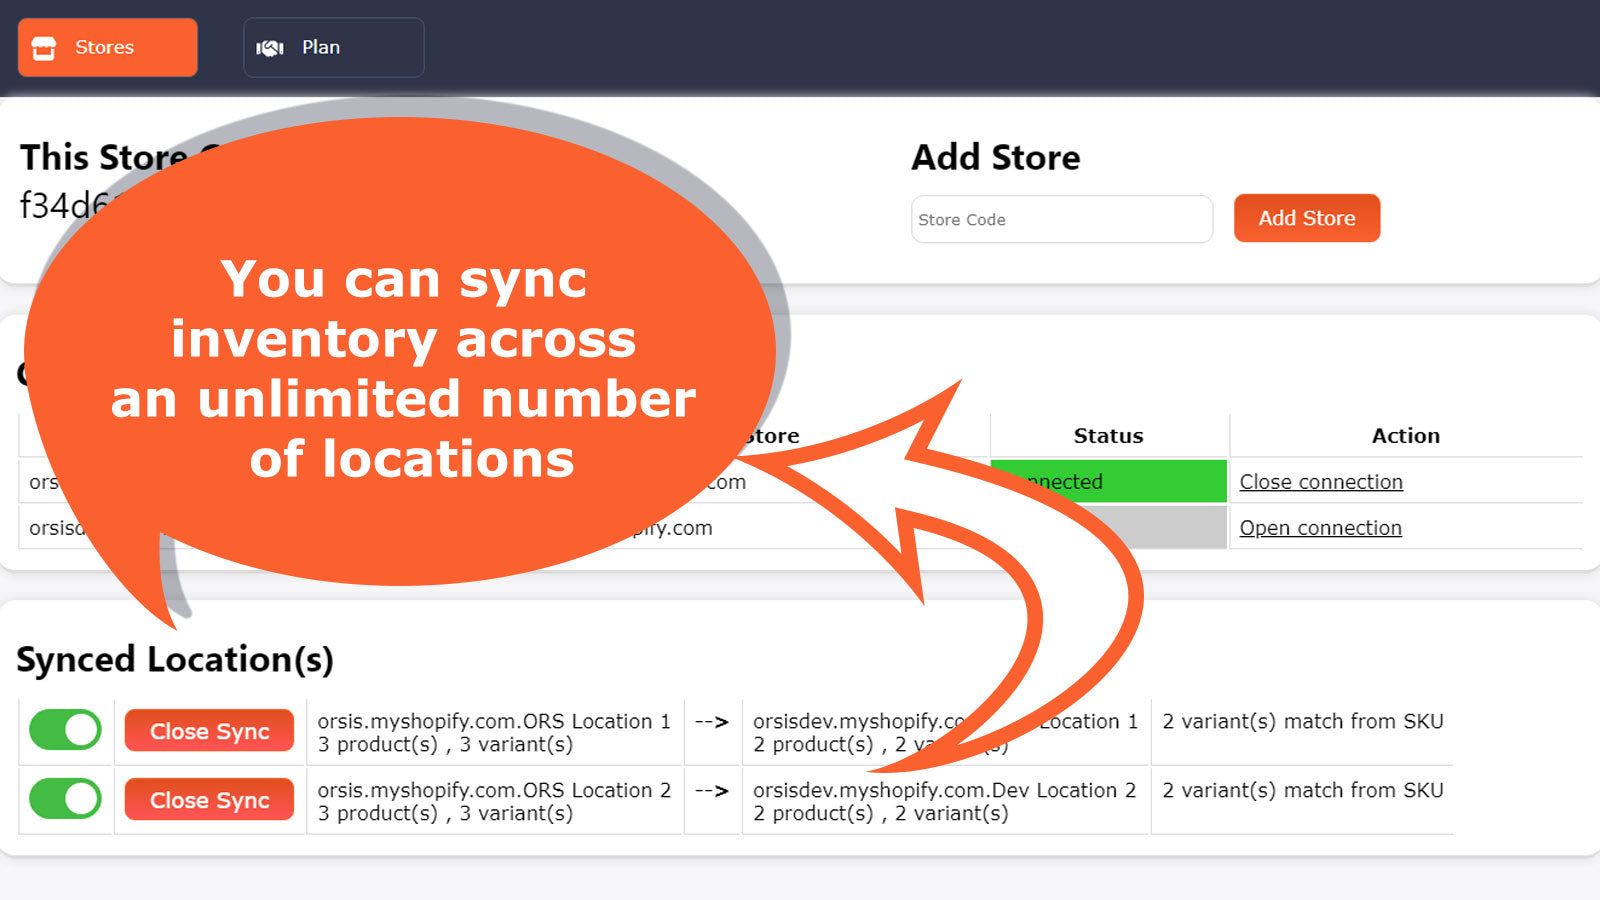 You can sync inventory across an unlimited number of locations